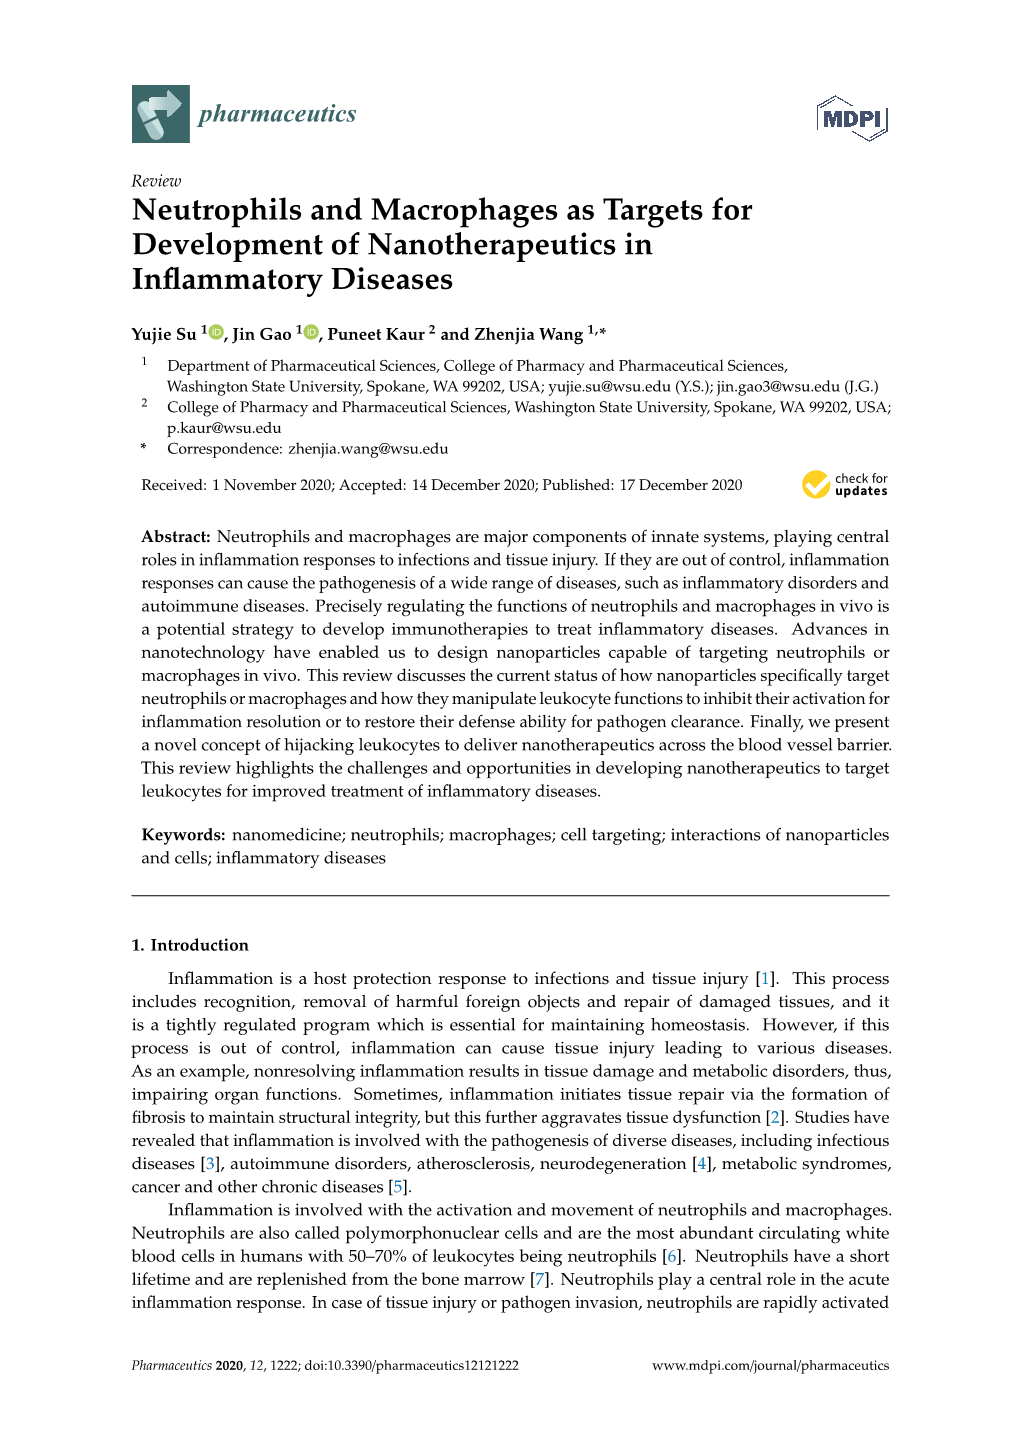 Neutrophils and Macrophages As Targets for Development of Nanotherapeutics in Inﬂammatory Diseases